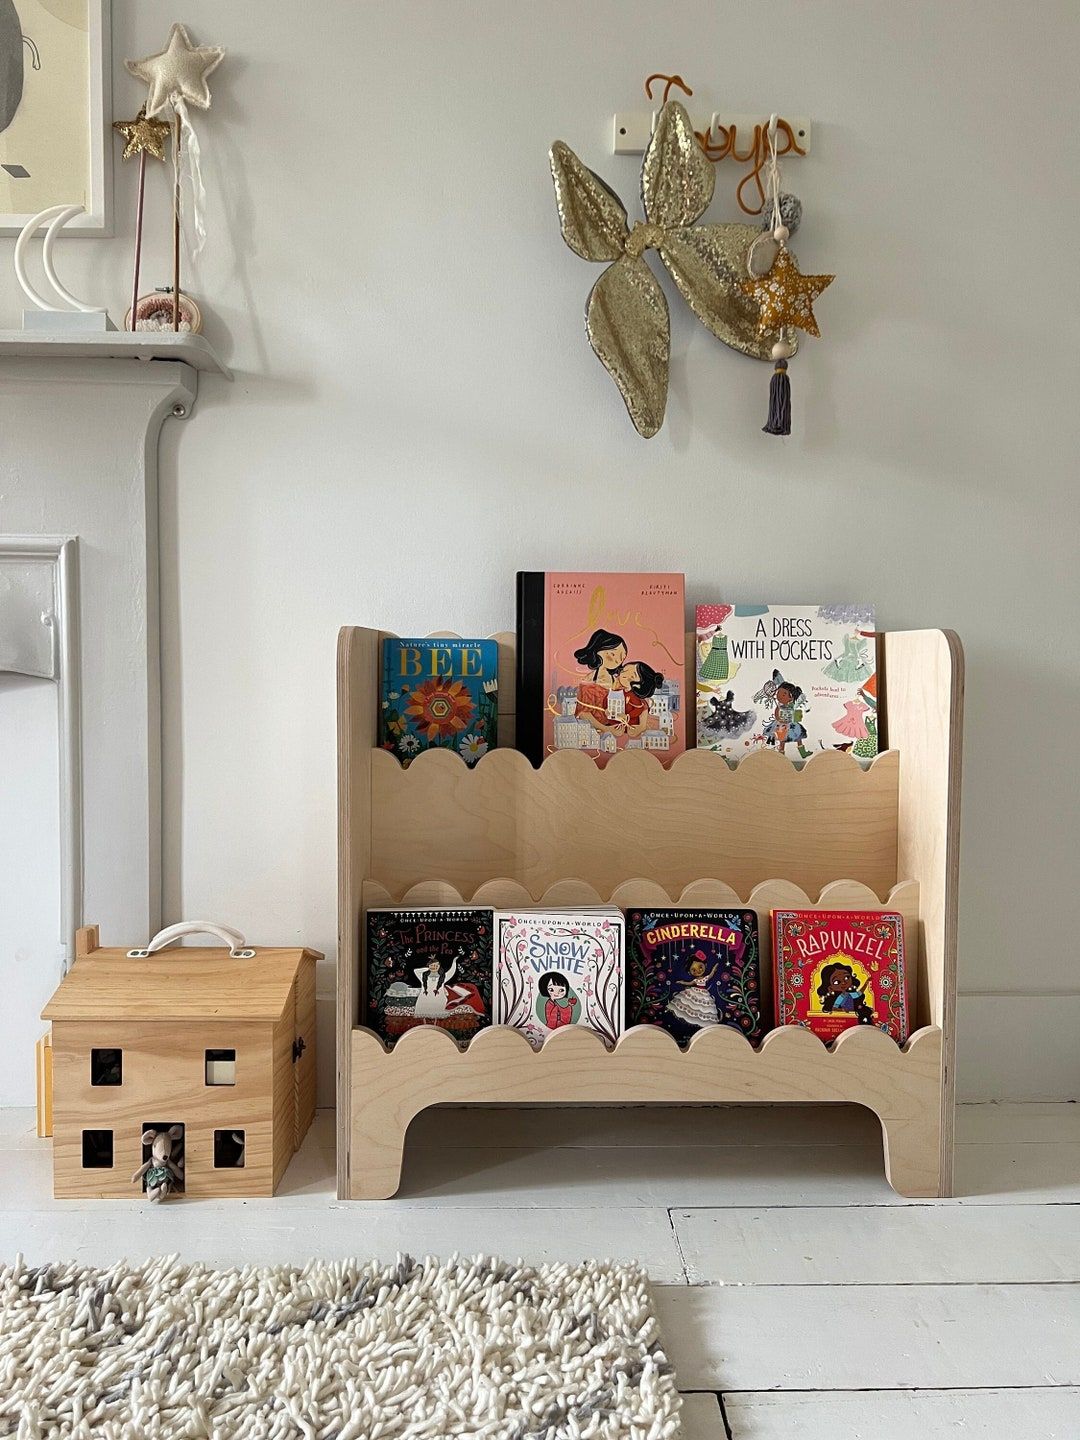 Tips for decorating with childrens
bookcase: